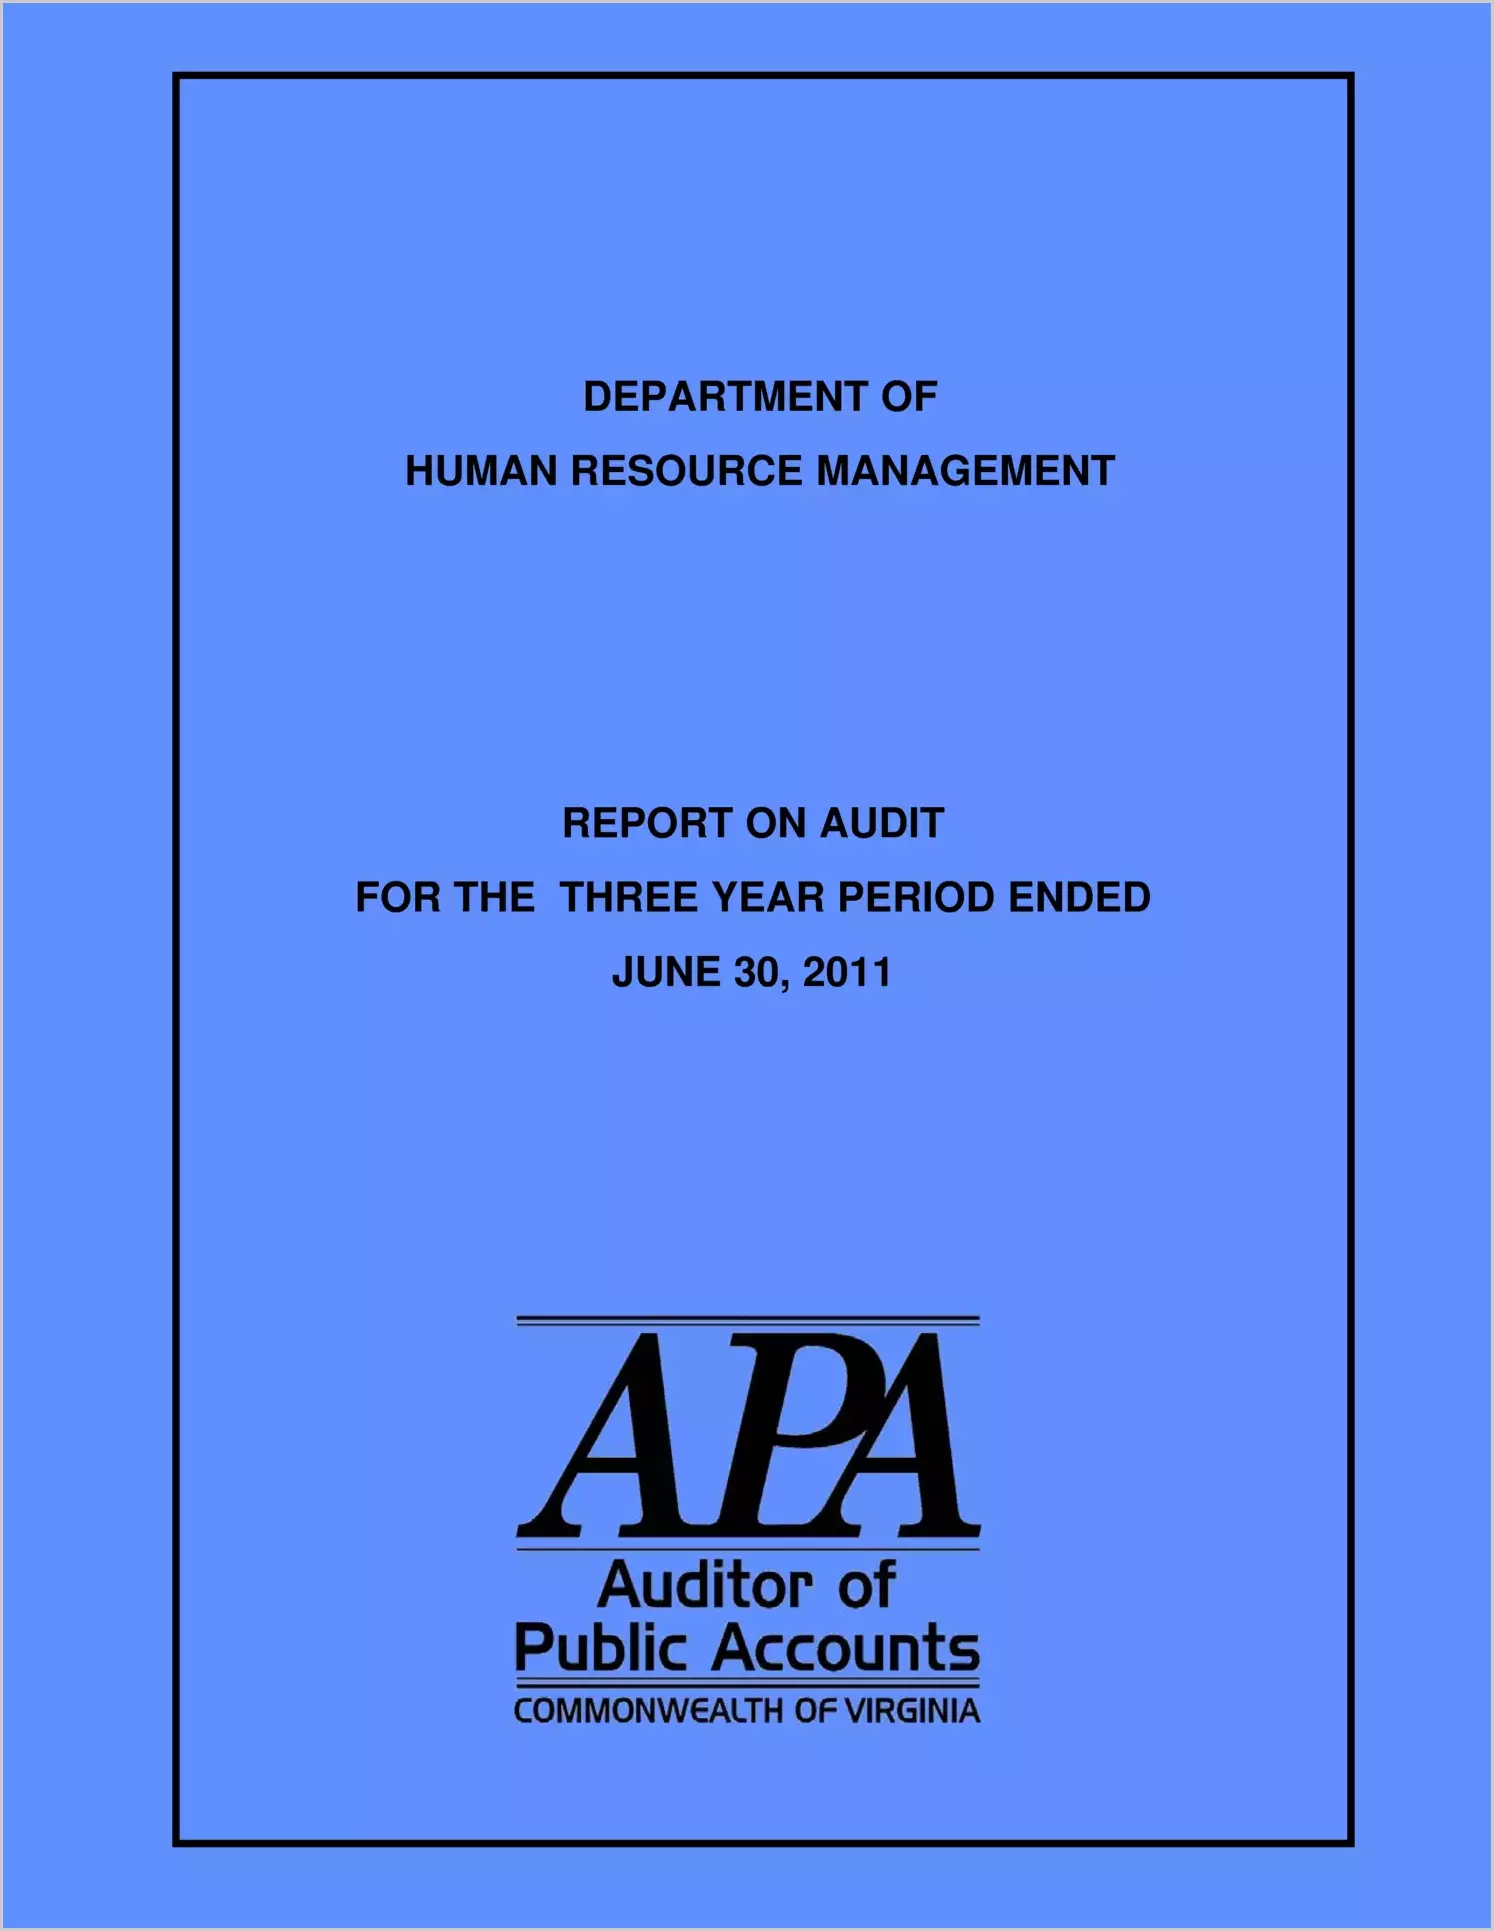 Department of Human Resource Management for the three year period ended June 30, 2011